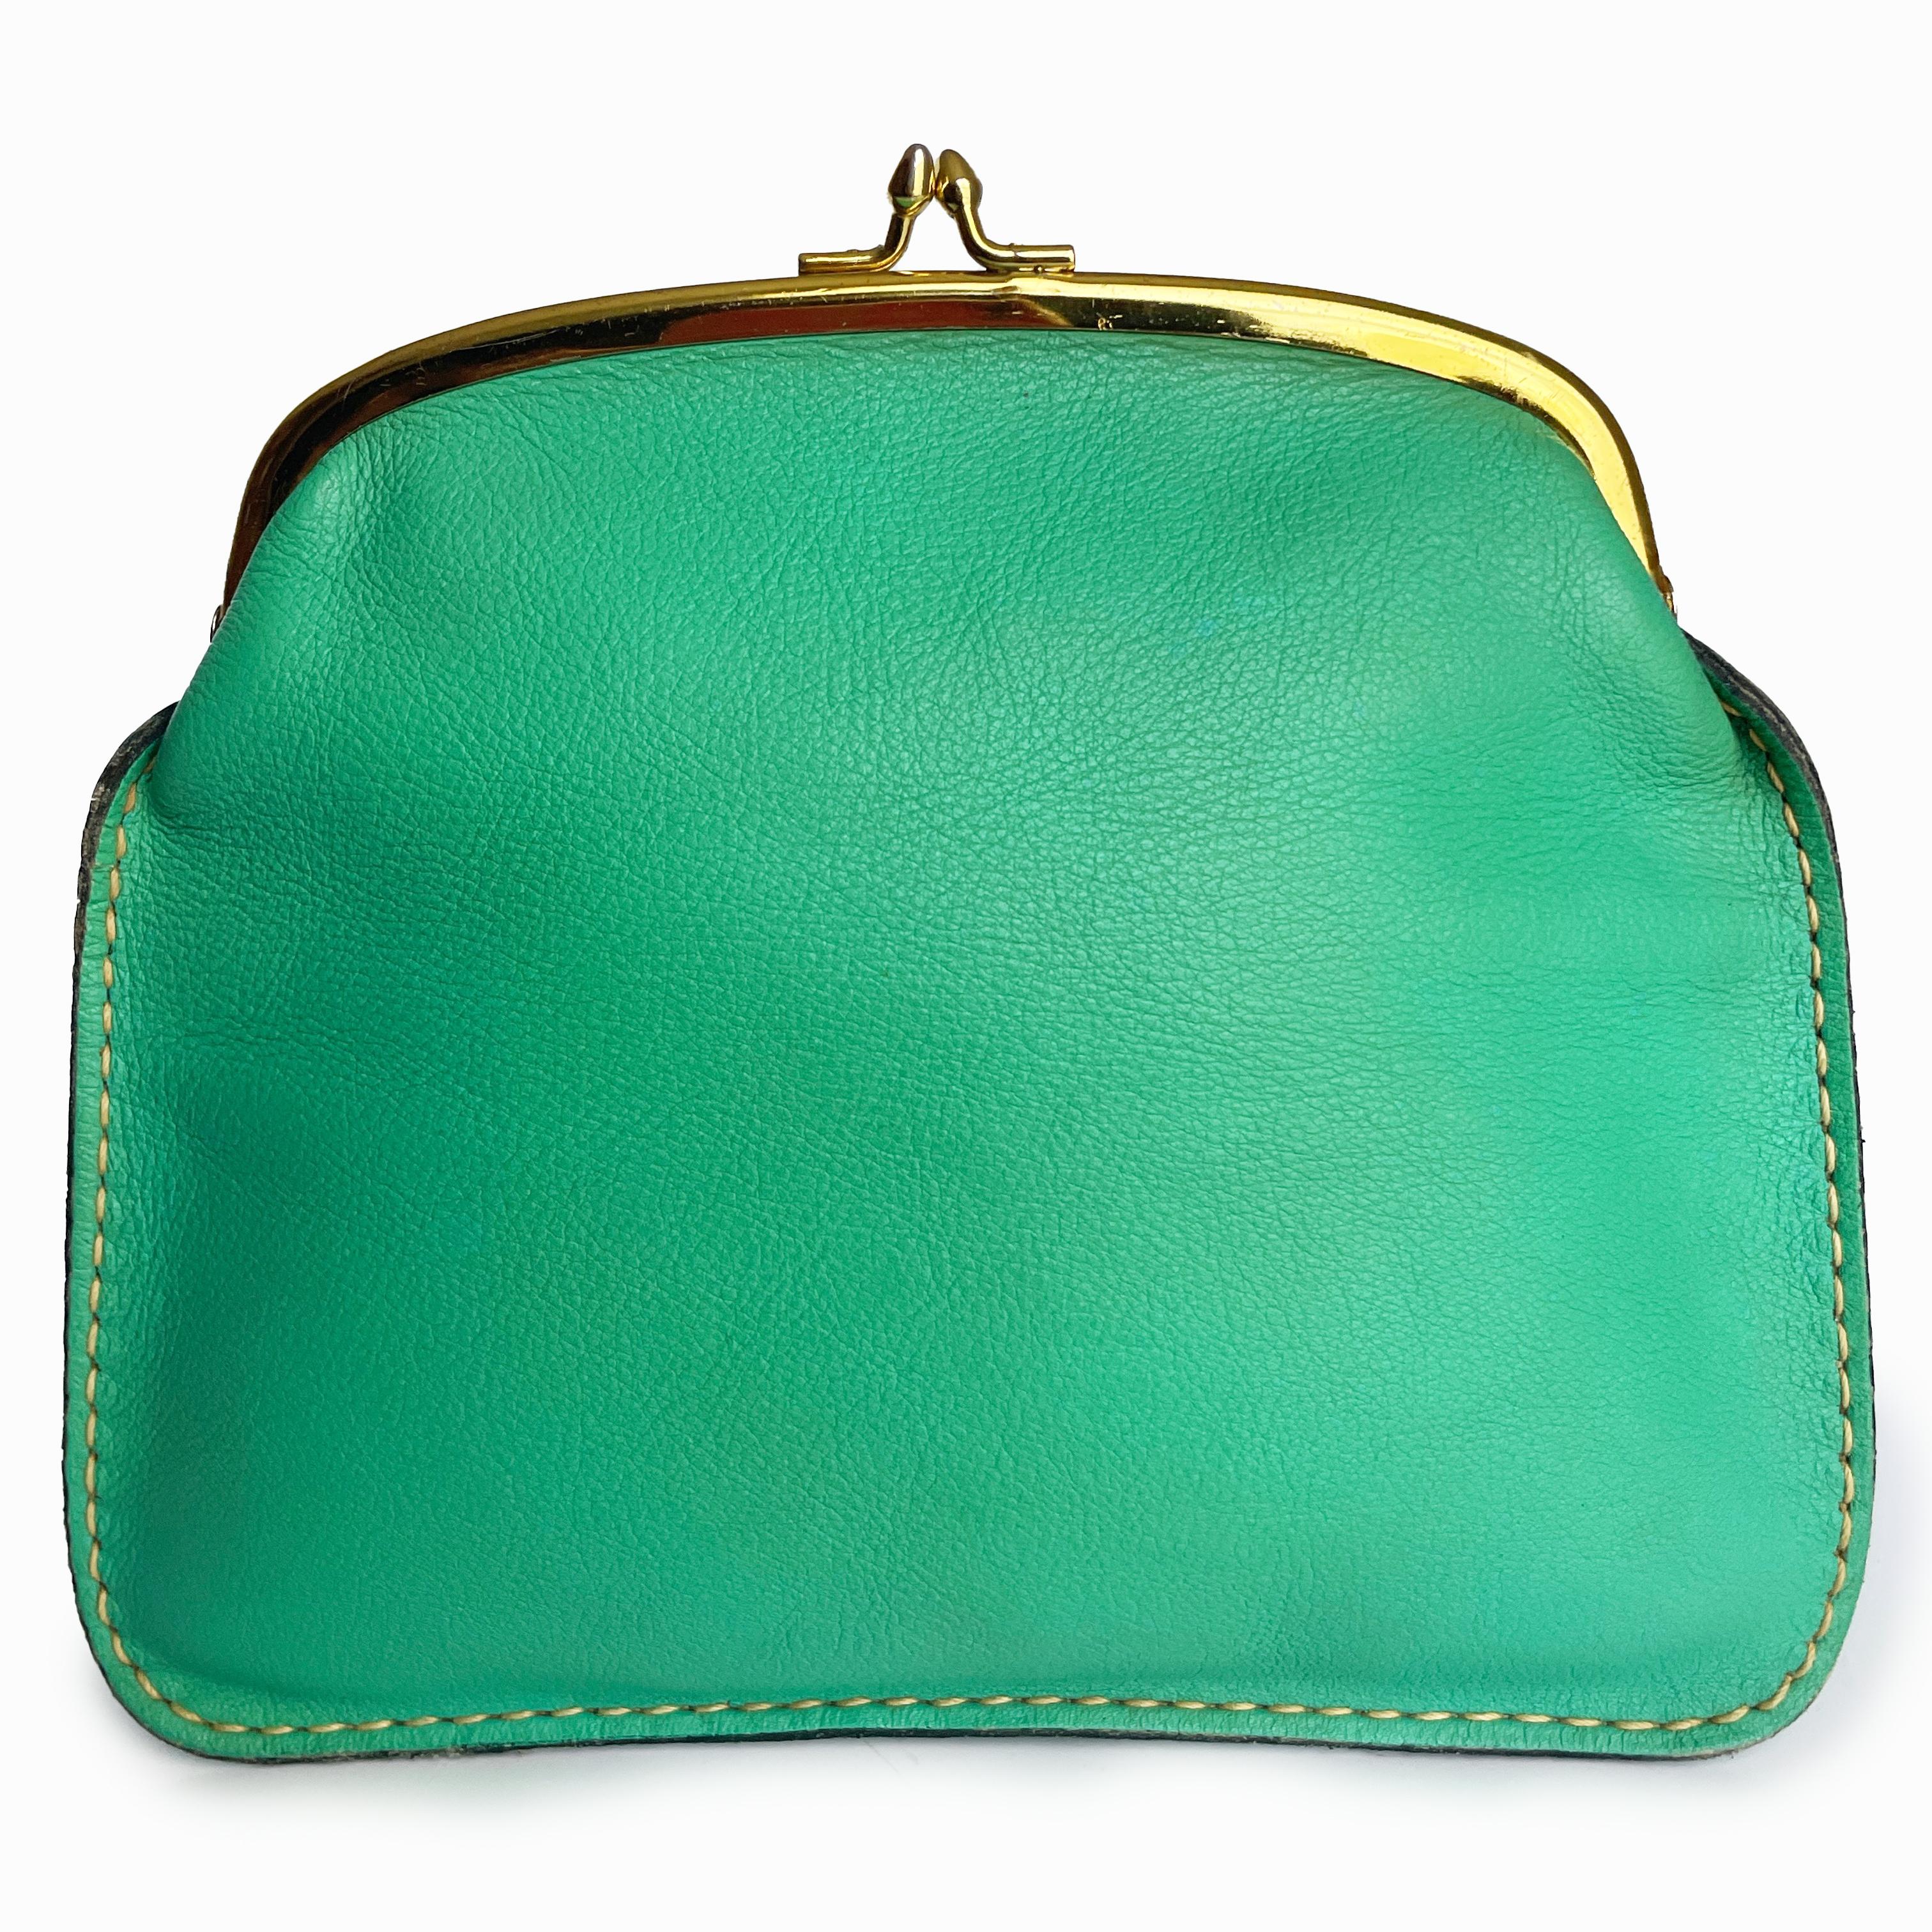 Bonnie Cashin for Coach 'foldover purse' or clutch bag, part of Bonnie's Cashin Carry accessories collection and likely made in the late 1960s.

Made from mint green leather with white contrast exterior stitching, this vibrant little bag fastens